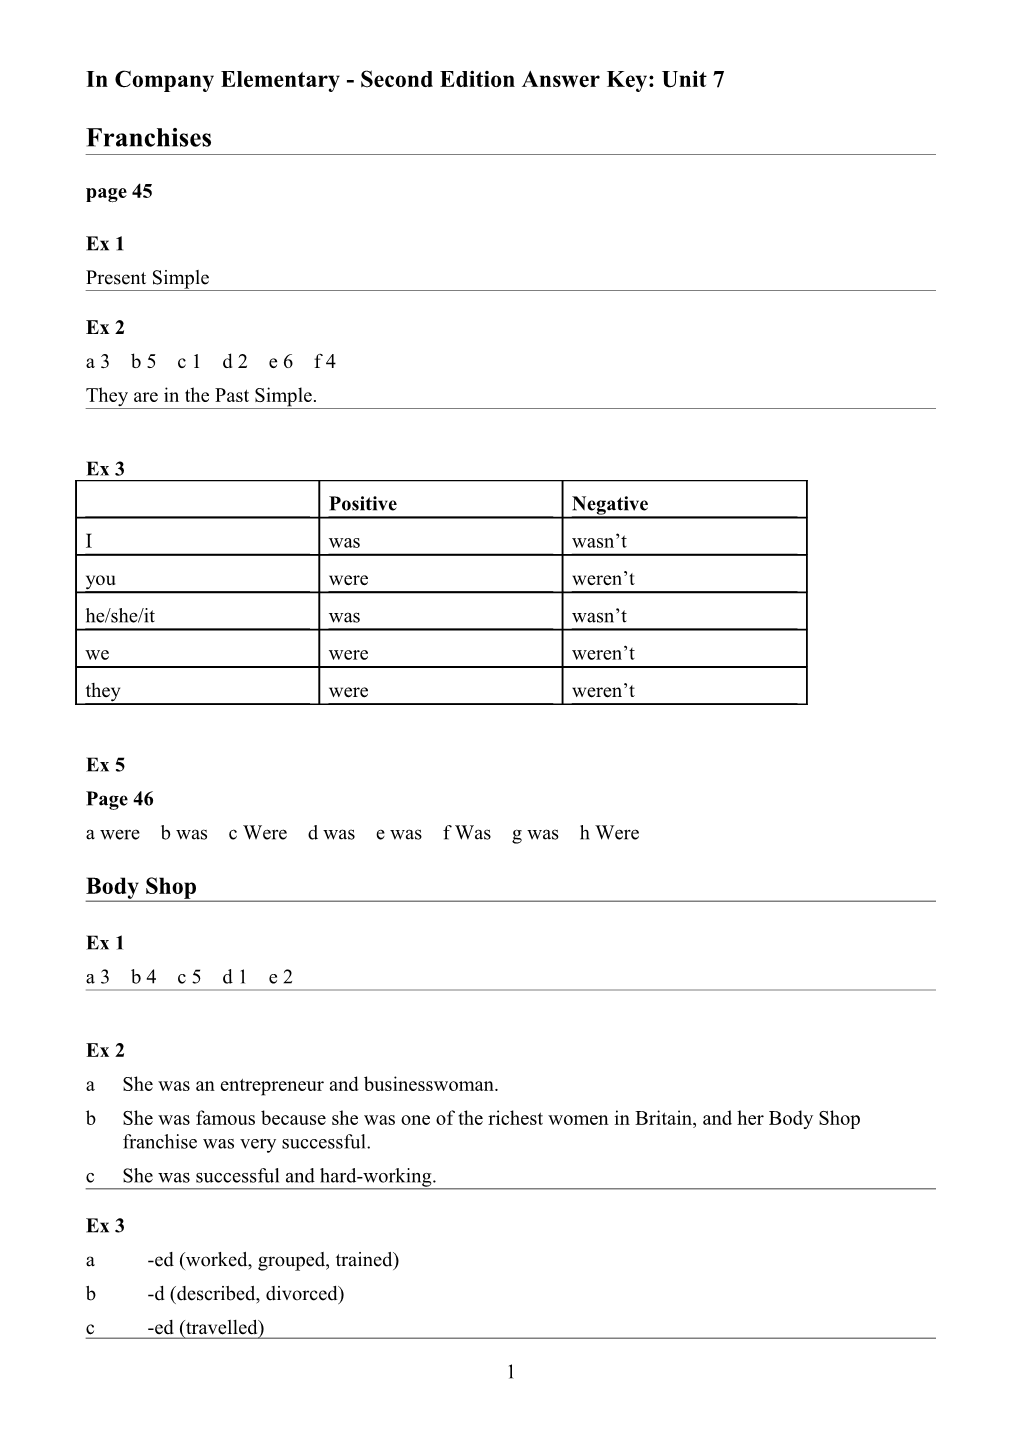 In Company Elementary Second Edition Answer Key: Unit 7